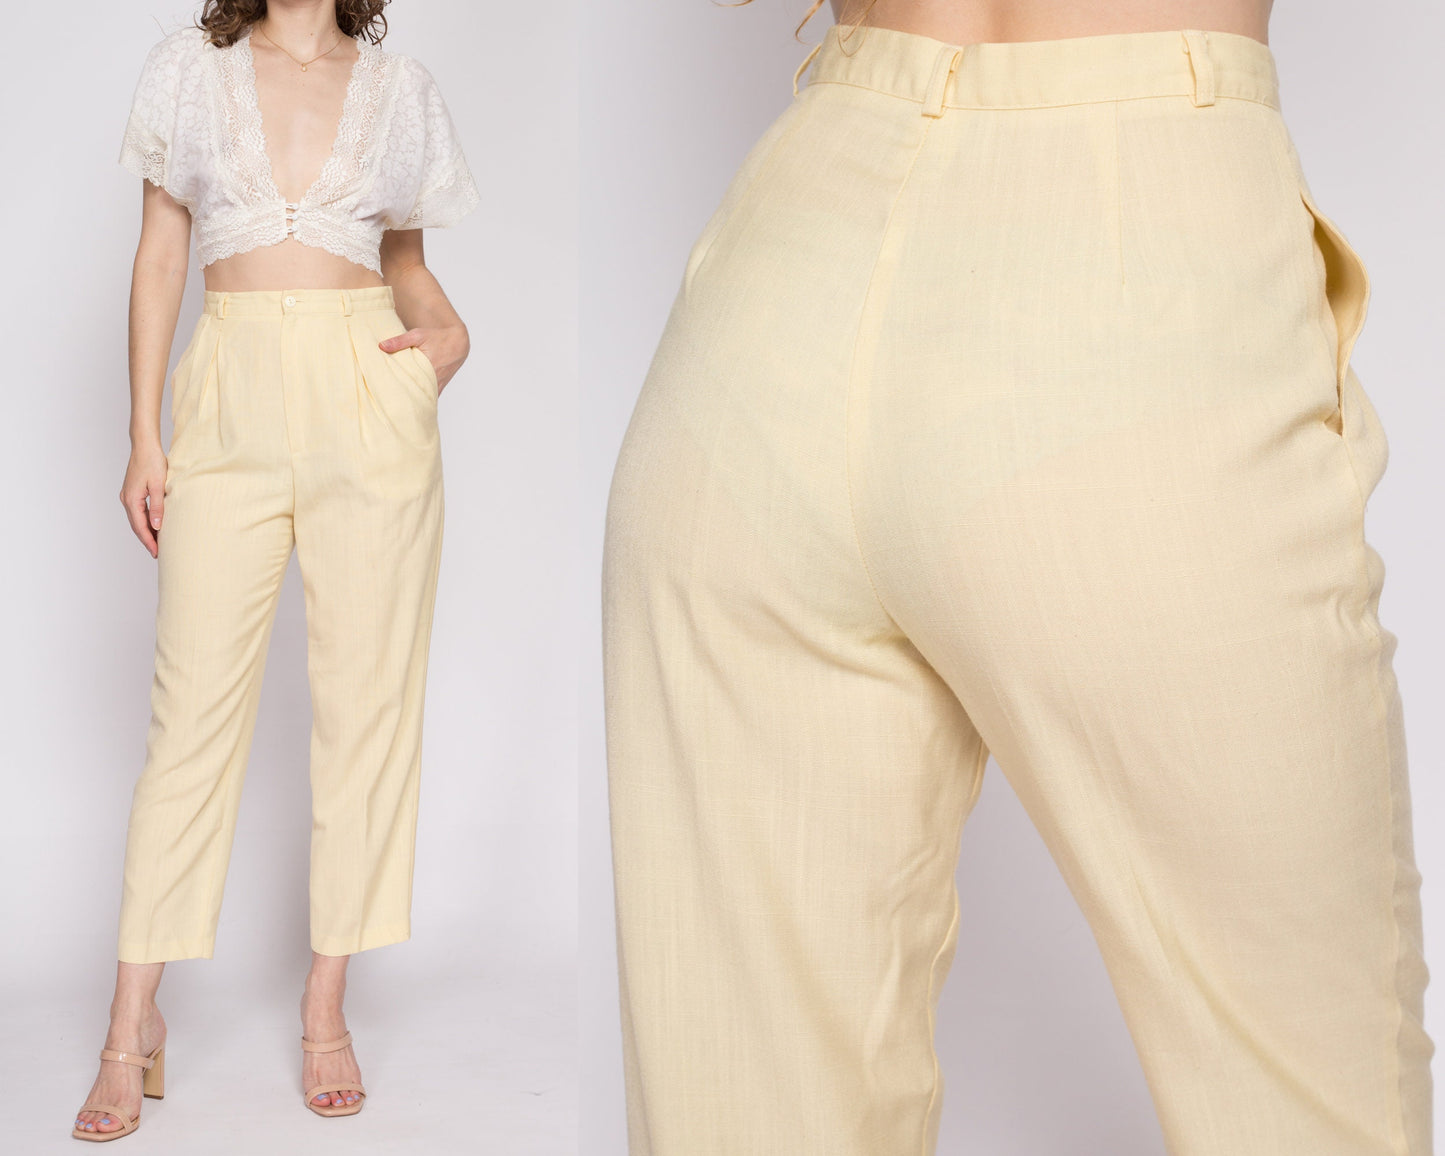 M| 80s Butter Yellow High Waisted Trousers - Medium, 27.5" | Vintage Pleated Tapered Leg Pants